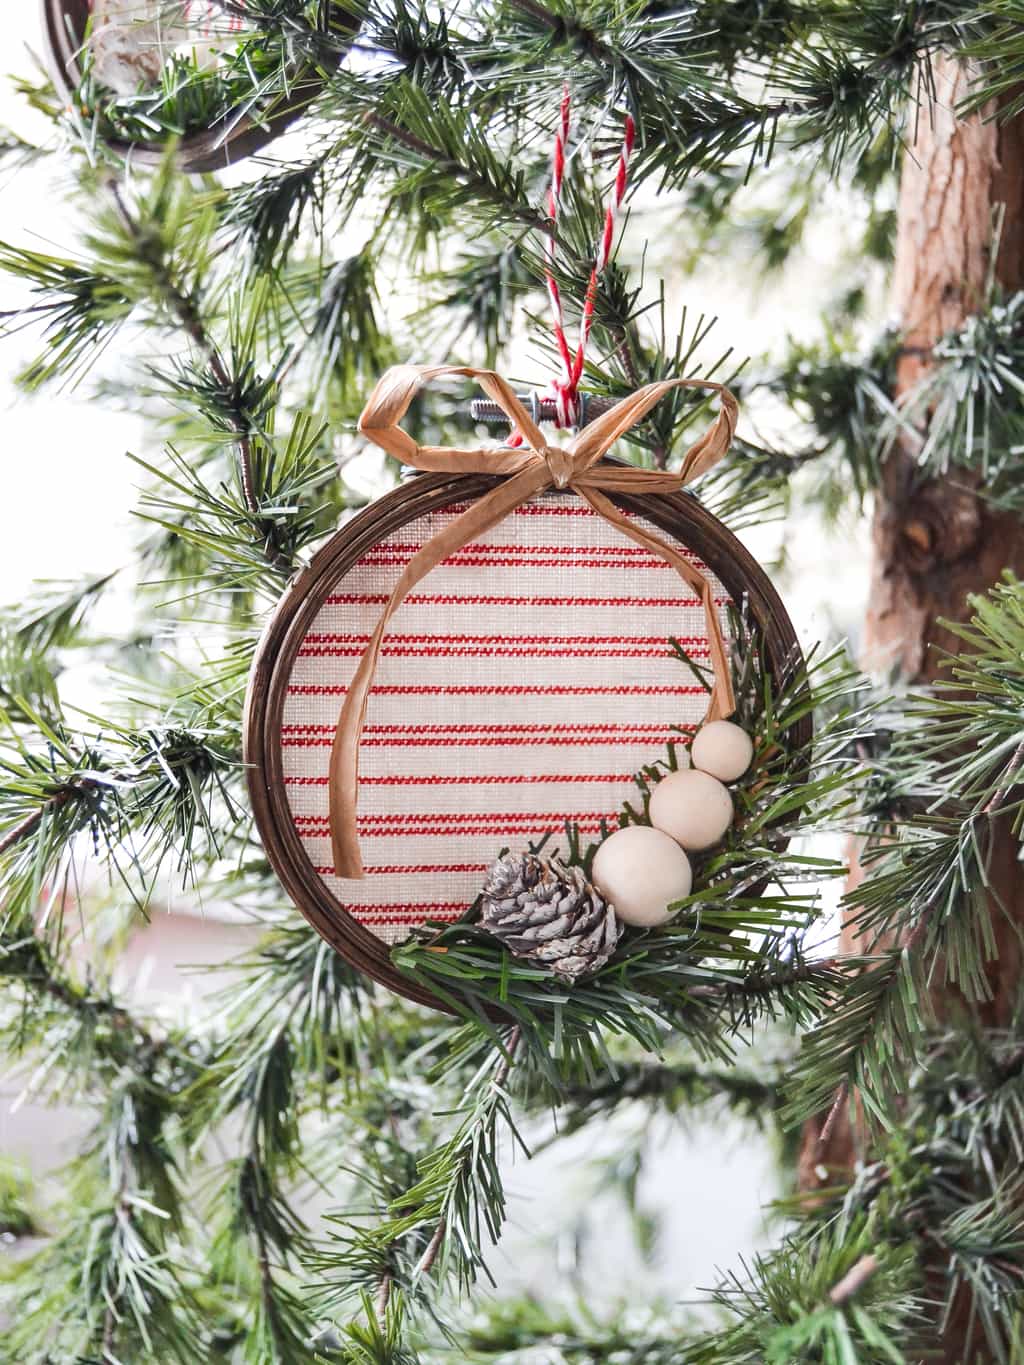 Embroidery hoop Christmas ornament.